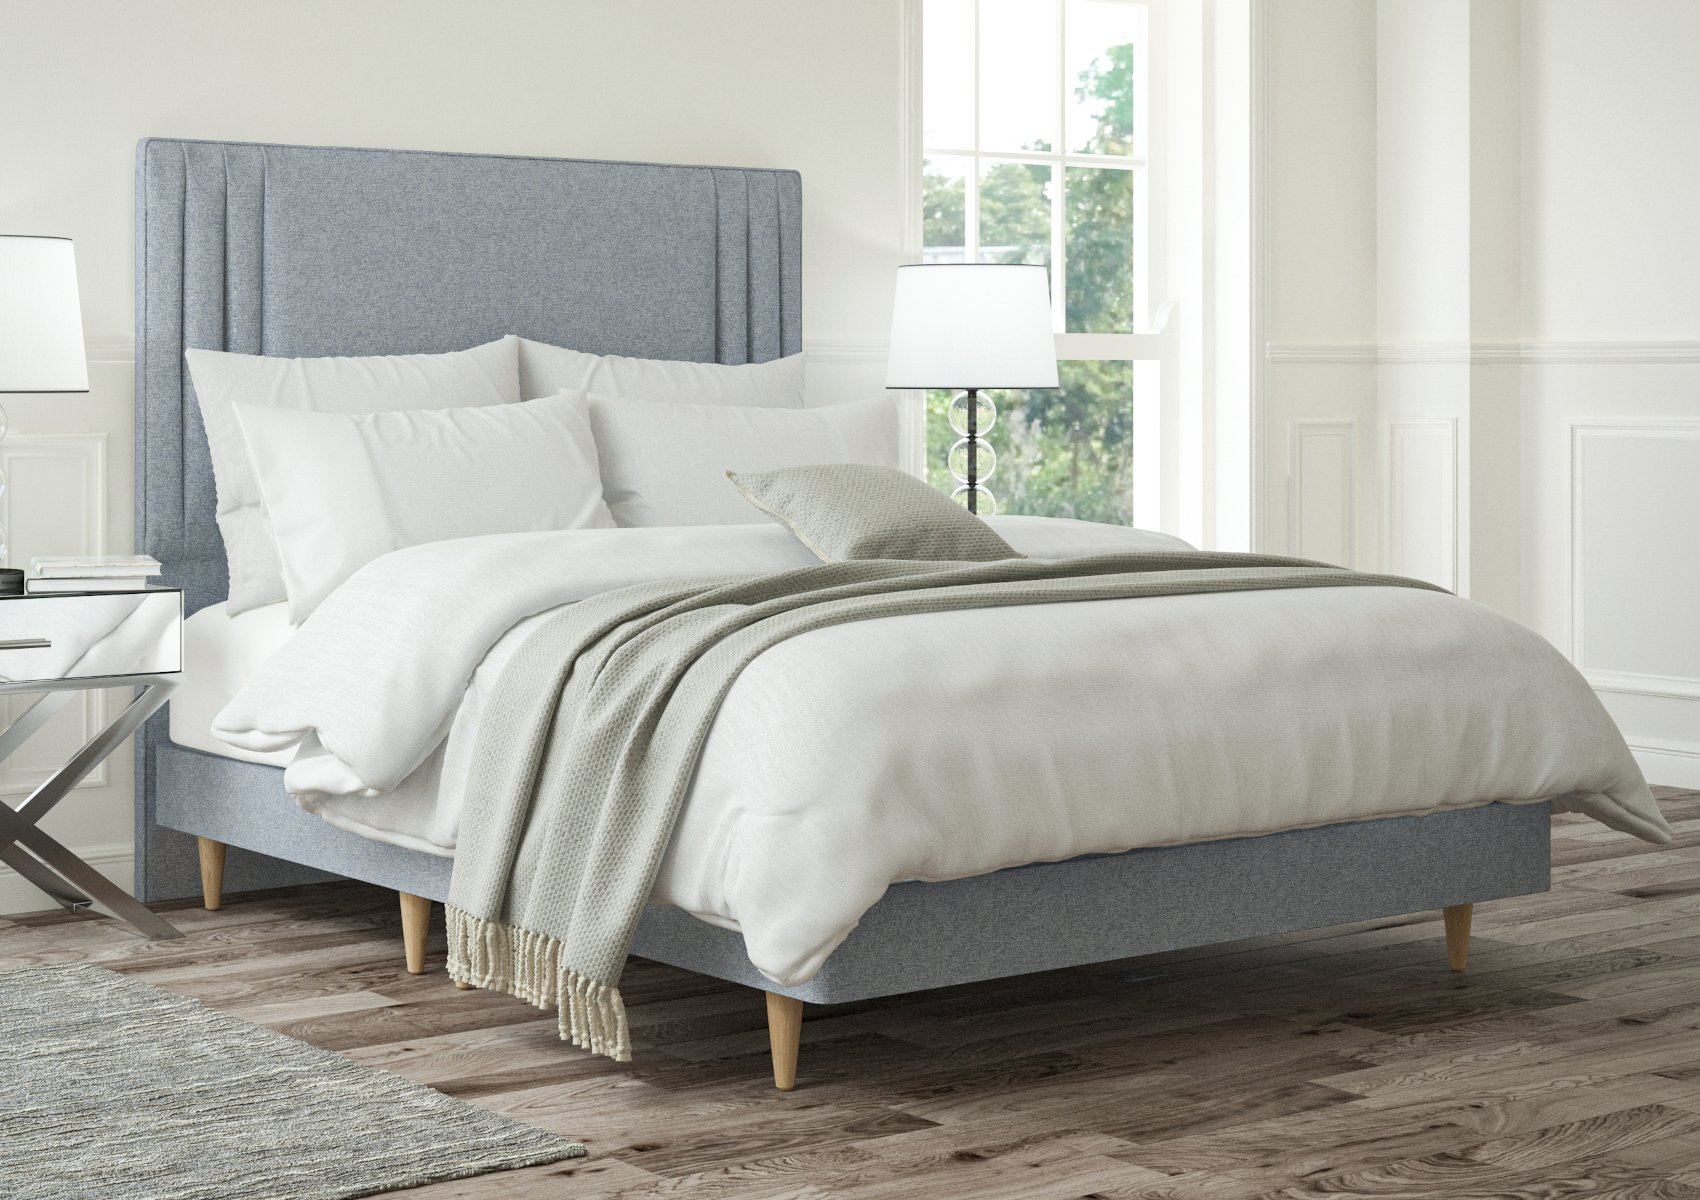 View Faith Arran Cyan Upholstered Double Bed Time4Sleep information